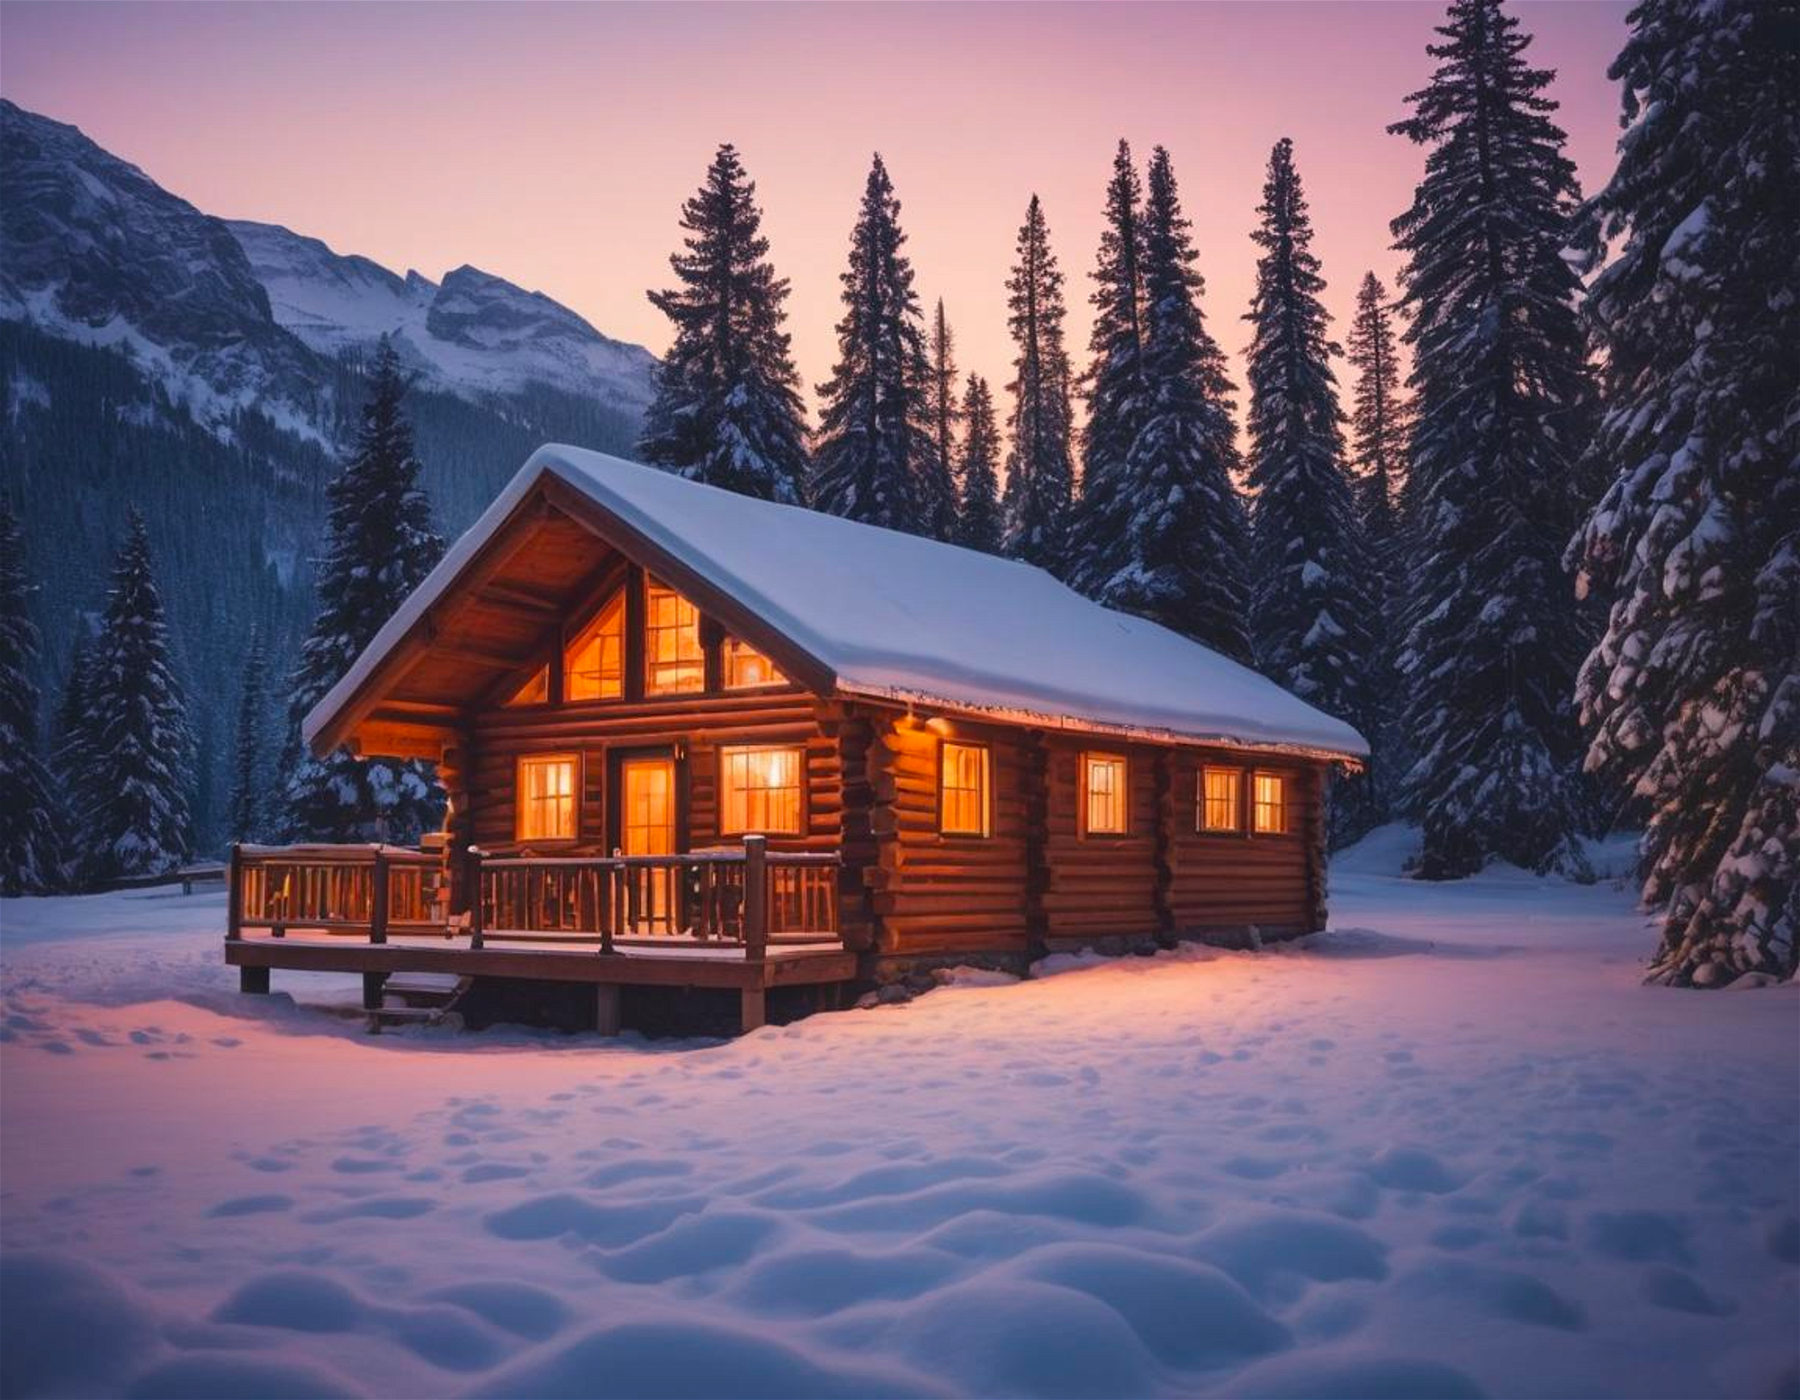 Wood cabin in the snow, sunset